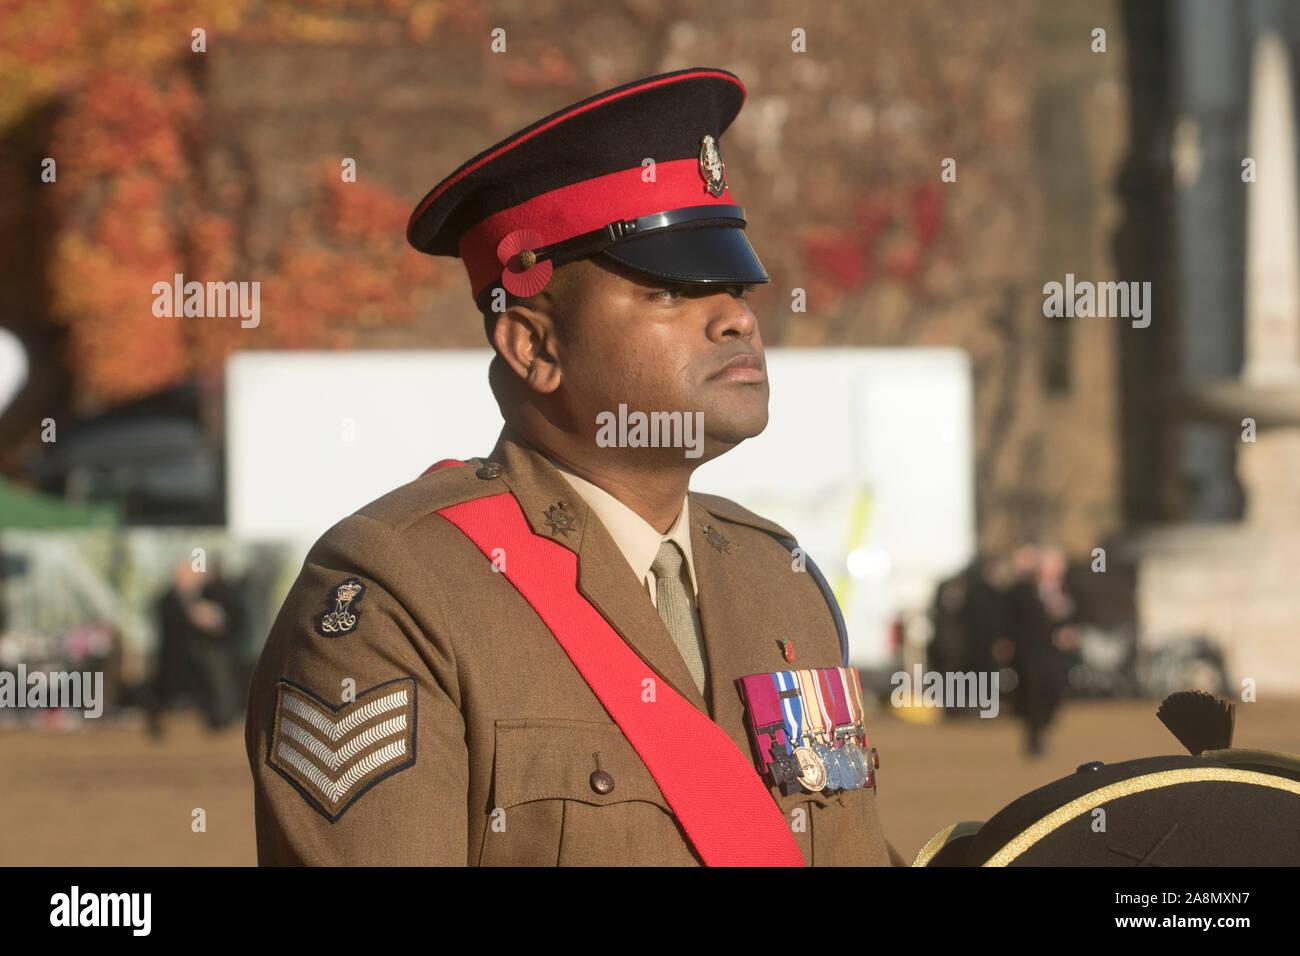 London, UK. 10  November 2019. Sergeant Johnson Beharry  British Army soldier who was awarded the Victoria Cross arrives at Horse Guards in the bright autumn sunshine  to take part in the remembrance parade Westminster London, UK. 10  November 2019. Jo Swinson Leader of the Liberal Democrat party arrives  in the bright autumn sunshine  to take part in the remembrance service at the Cenotaph in Whitehall to remember  the contribution of British and Commonwealth military and civilian servicemen and women in the two World Wars and later conflicts. amer ghazzal /Alamy live News. amer ghazzal /Alam Stock Photo